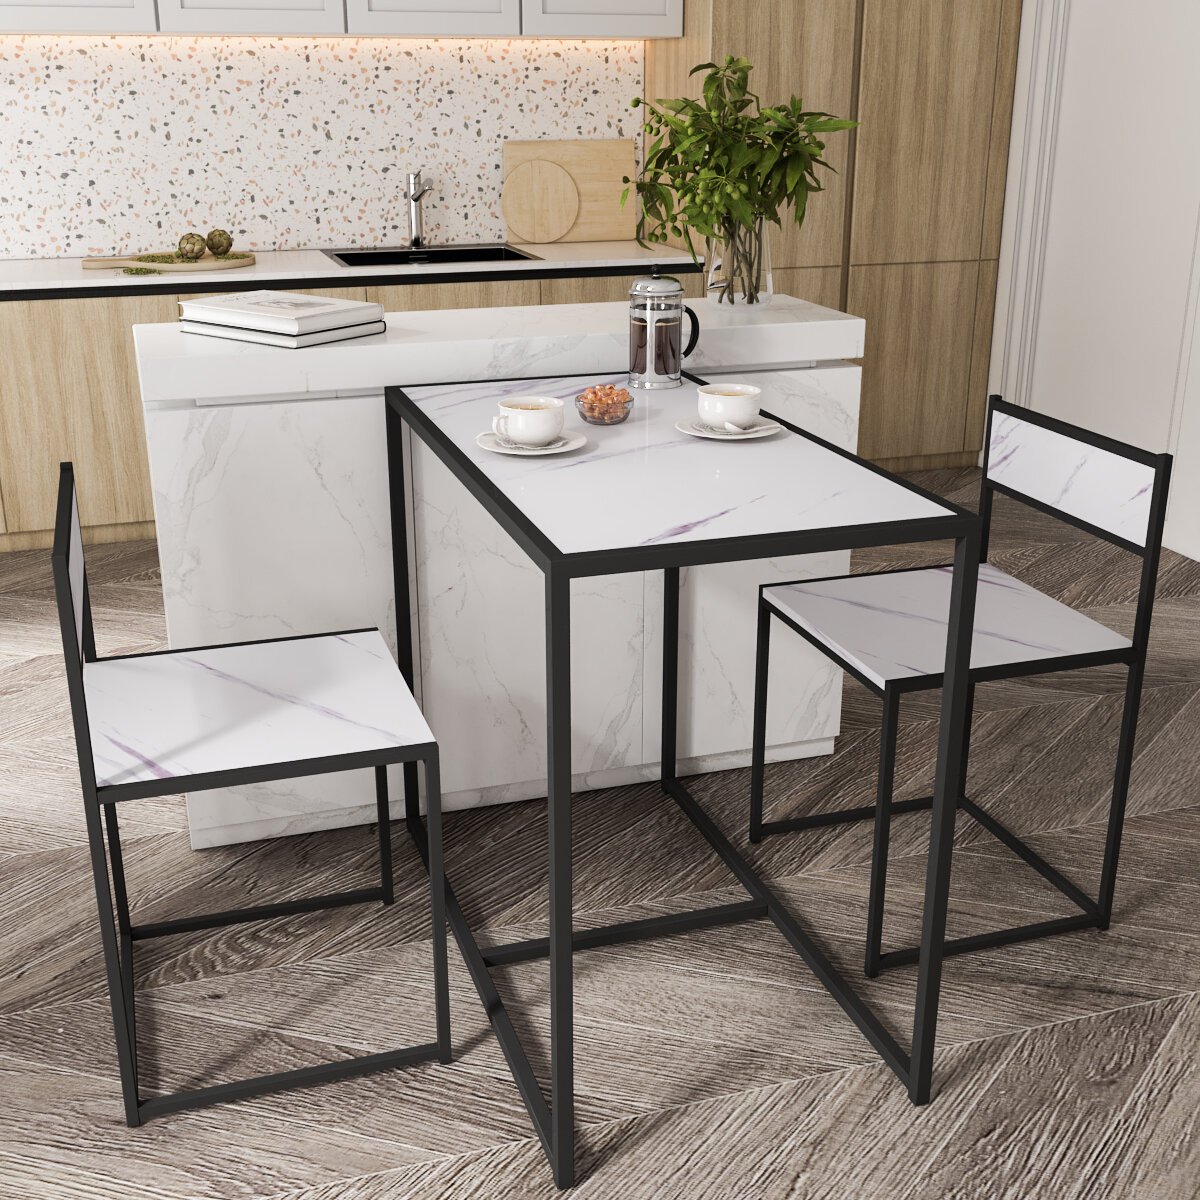 best price,dinaza,dining,wood,table,set,with,chairs,eu,coupon,price,discount